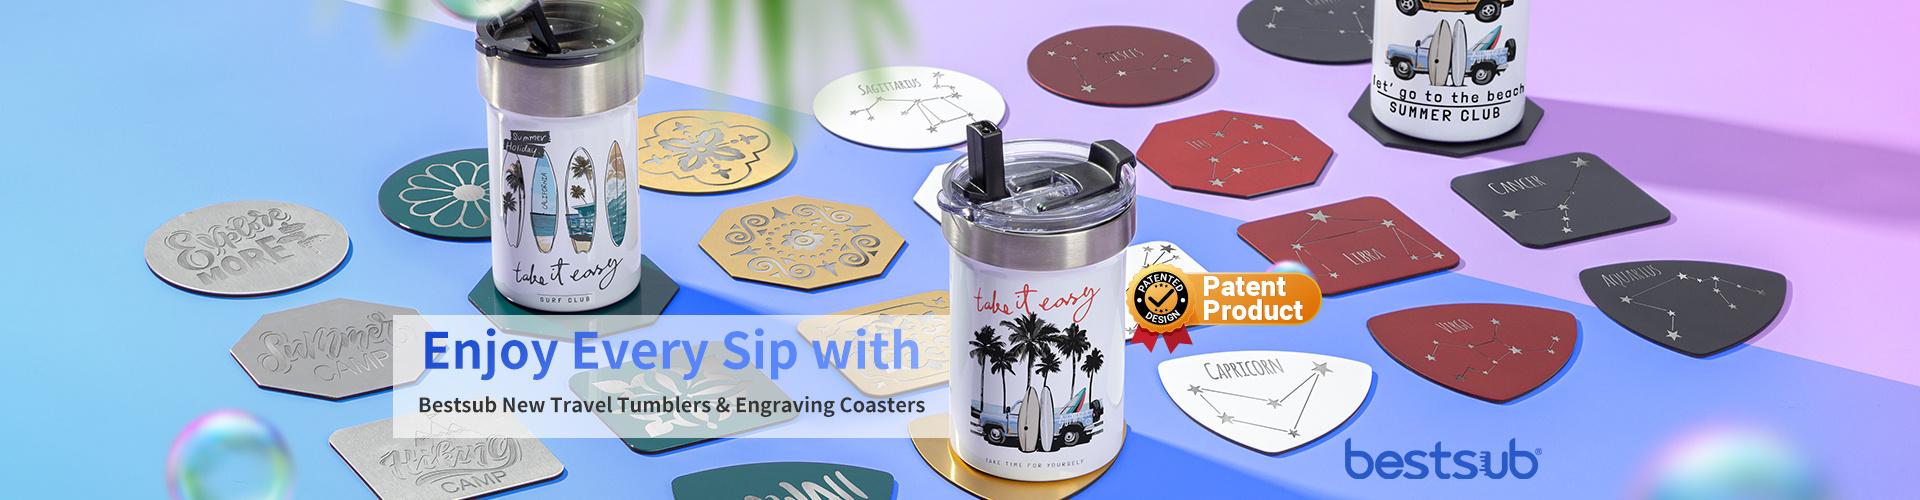 2022-06-09_Enjoy_Every_Sip_with_Bestsub_New_Travel_Tumblers_new_web